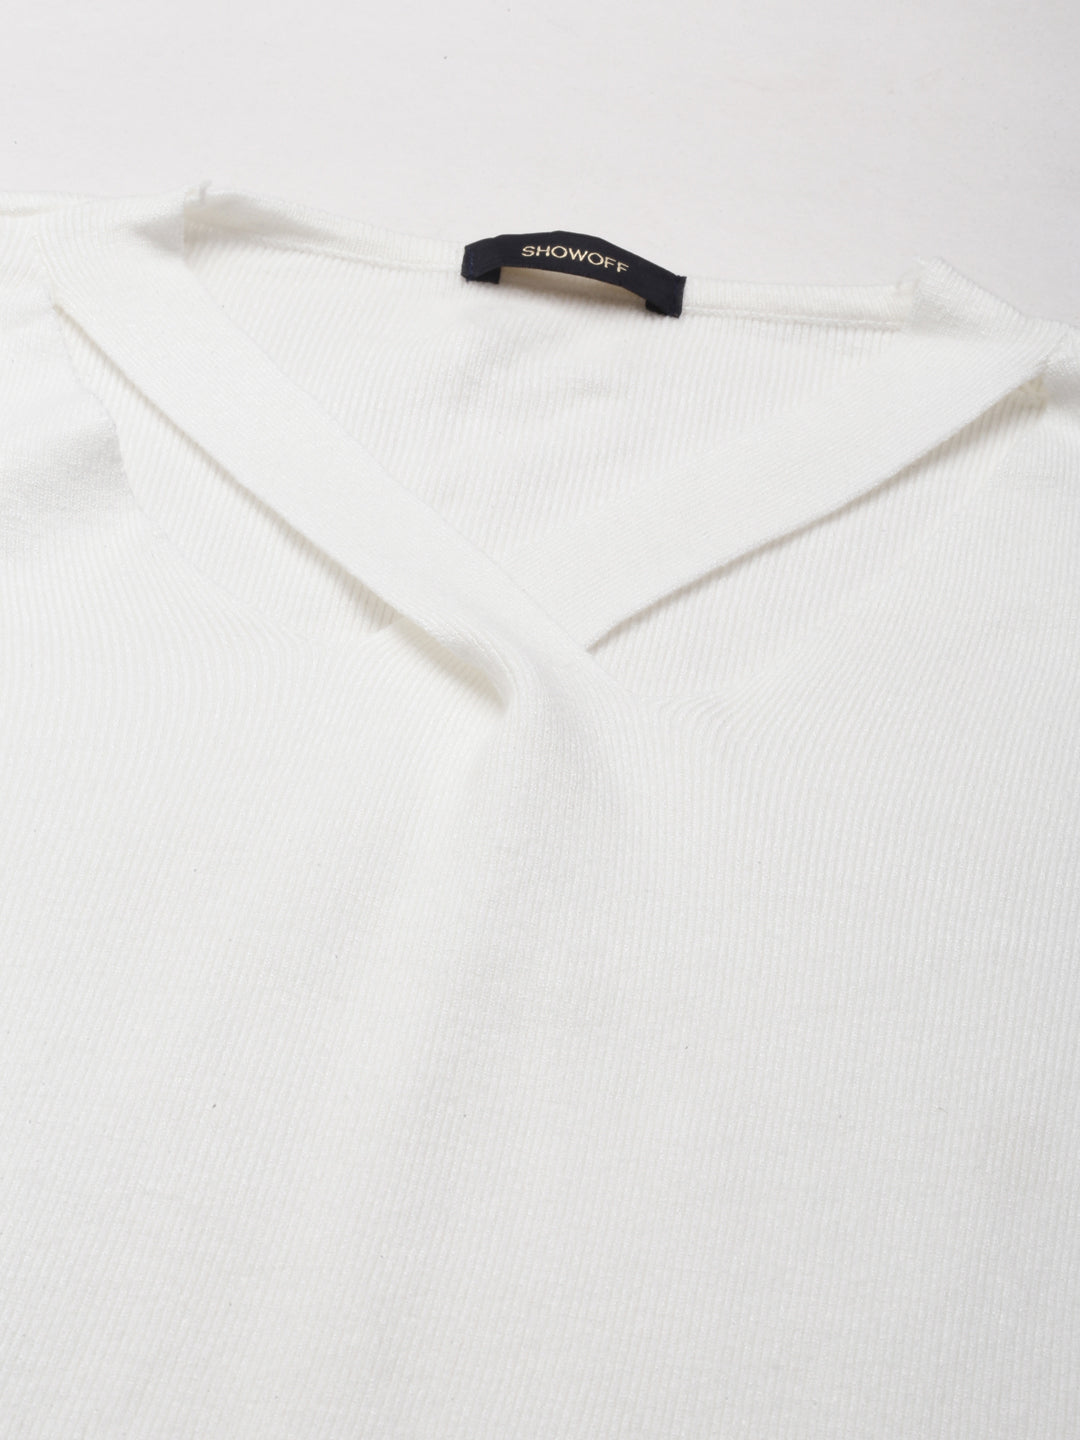 V-Neck Solid White Fitted Regular Top